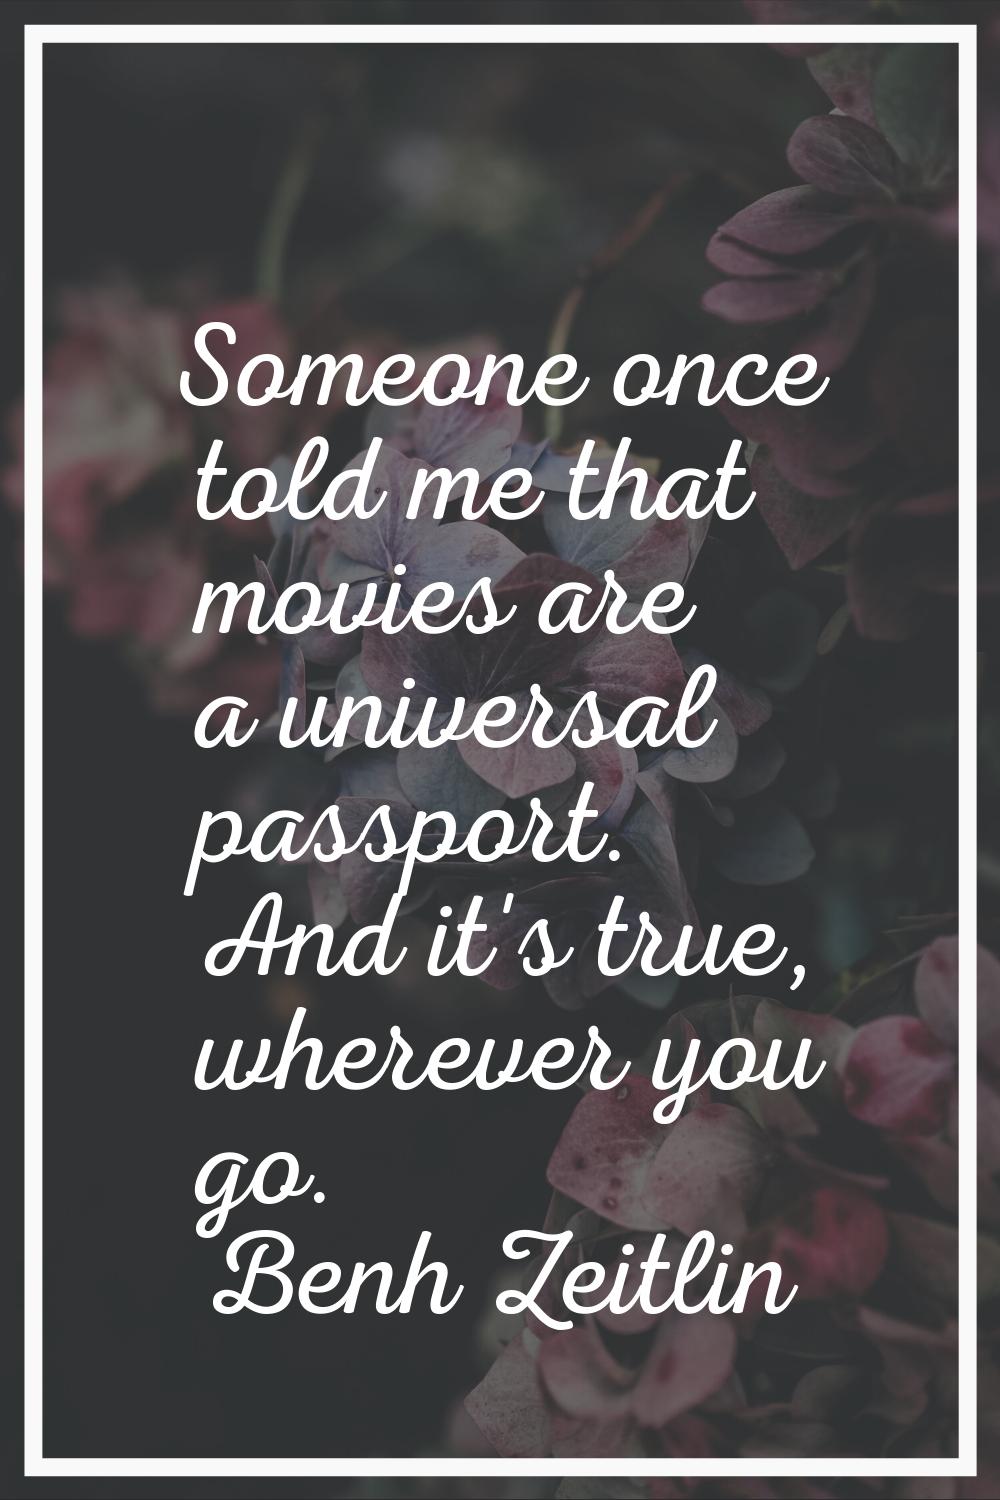 Someone once told me that movies are a universal passport. And it's true, wherever you go.